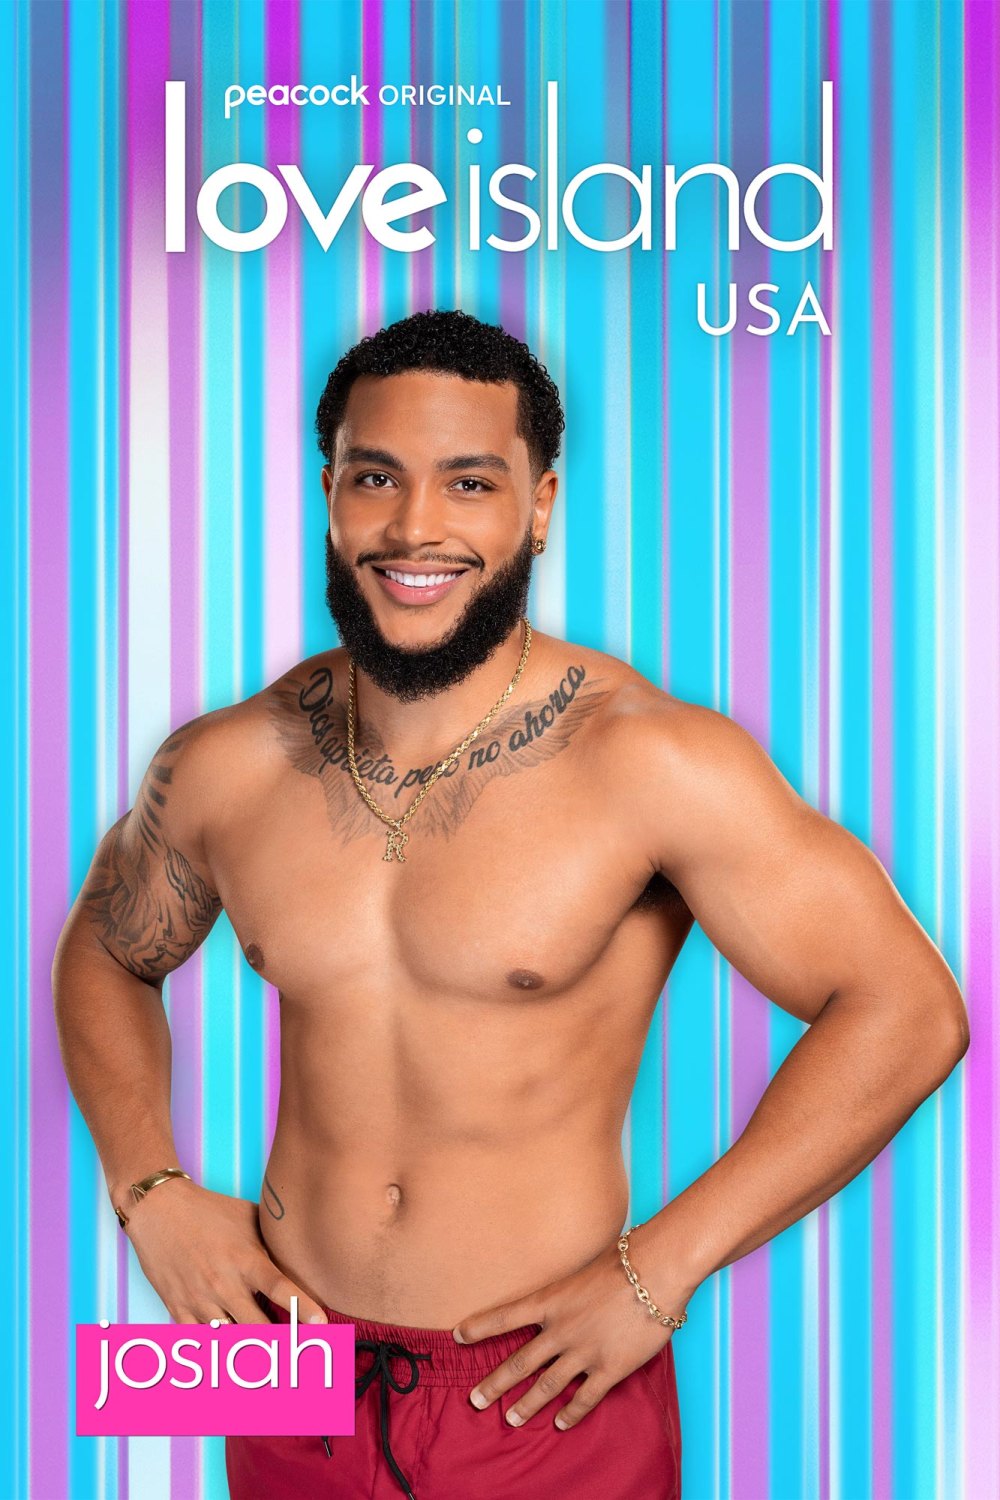 Discover the New Shell Bombs on Love Island USA Season 6 Coming to Casa Amor LoveIsland_S6_JOSIAH_CharacterPortrait_4000x6000_Text 130